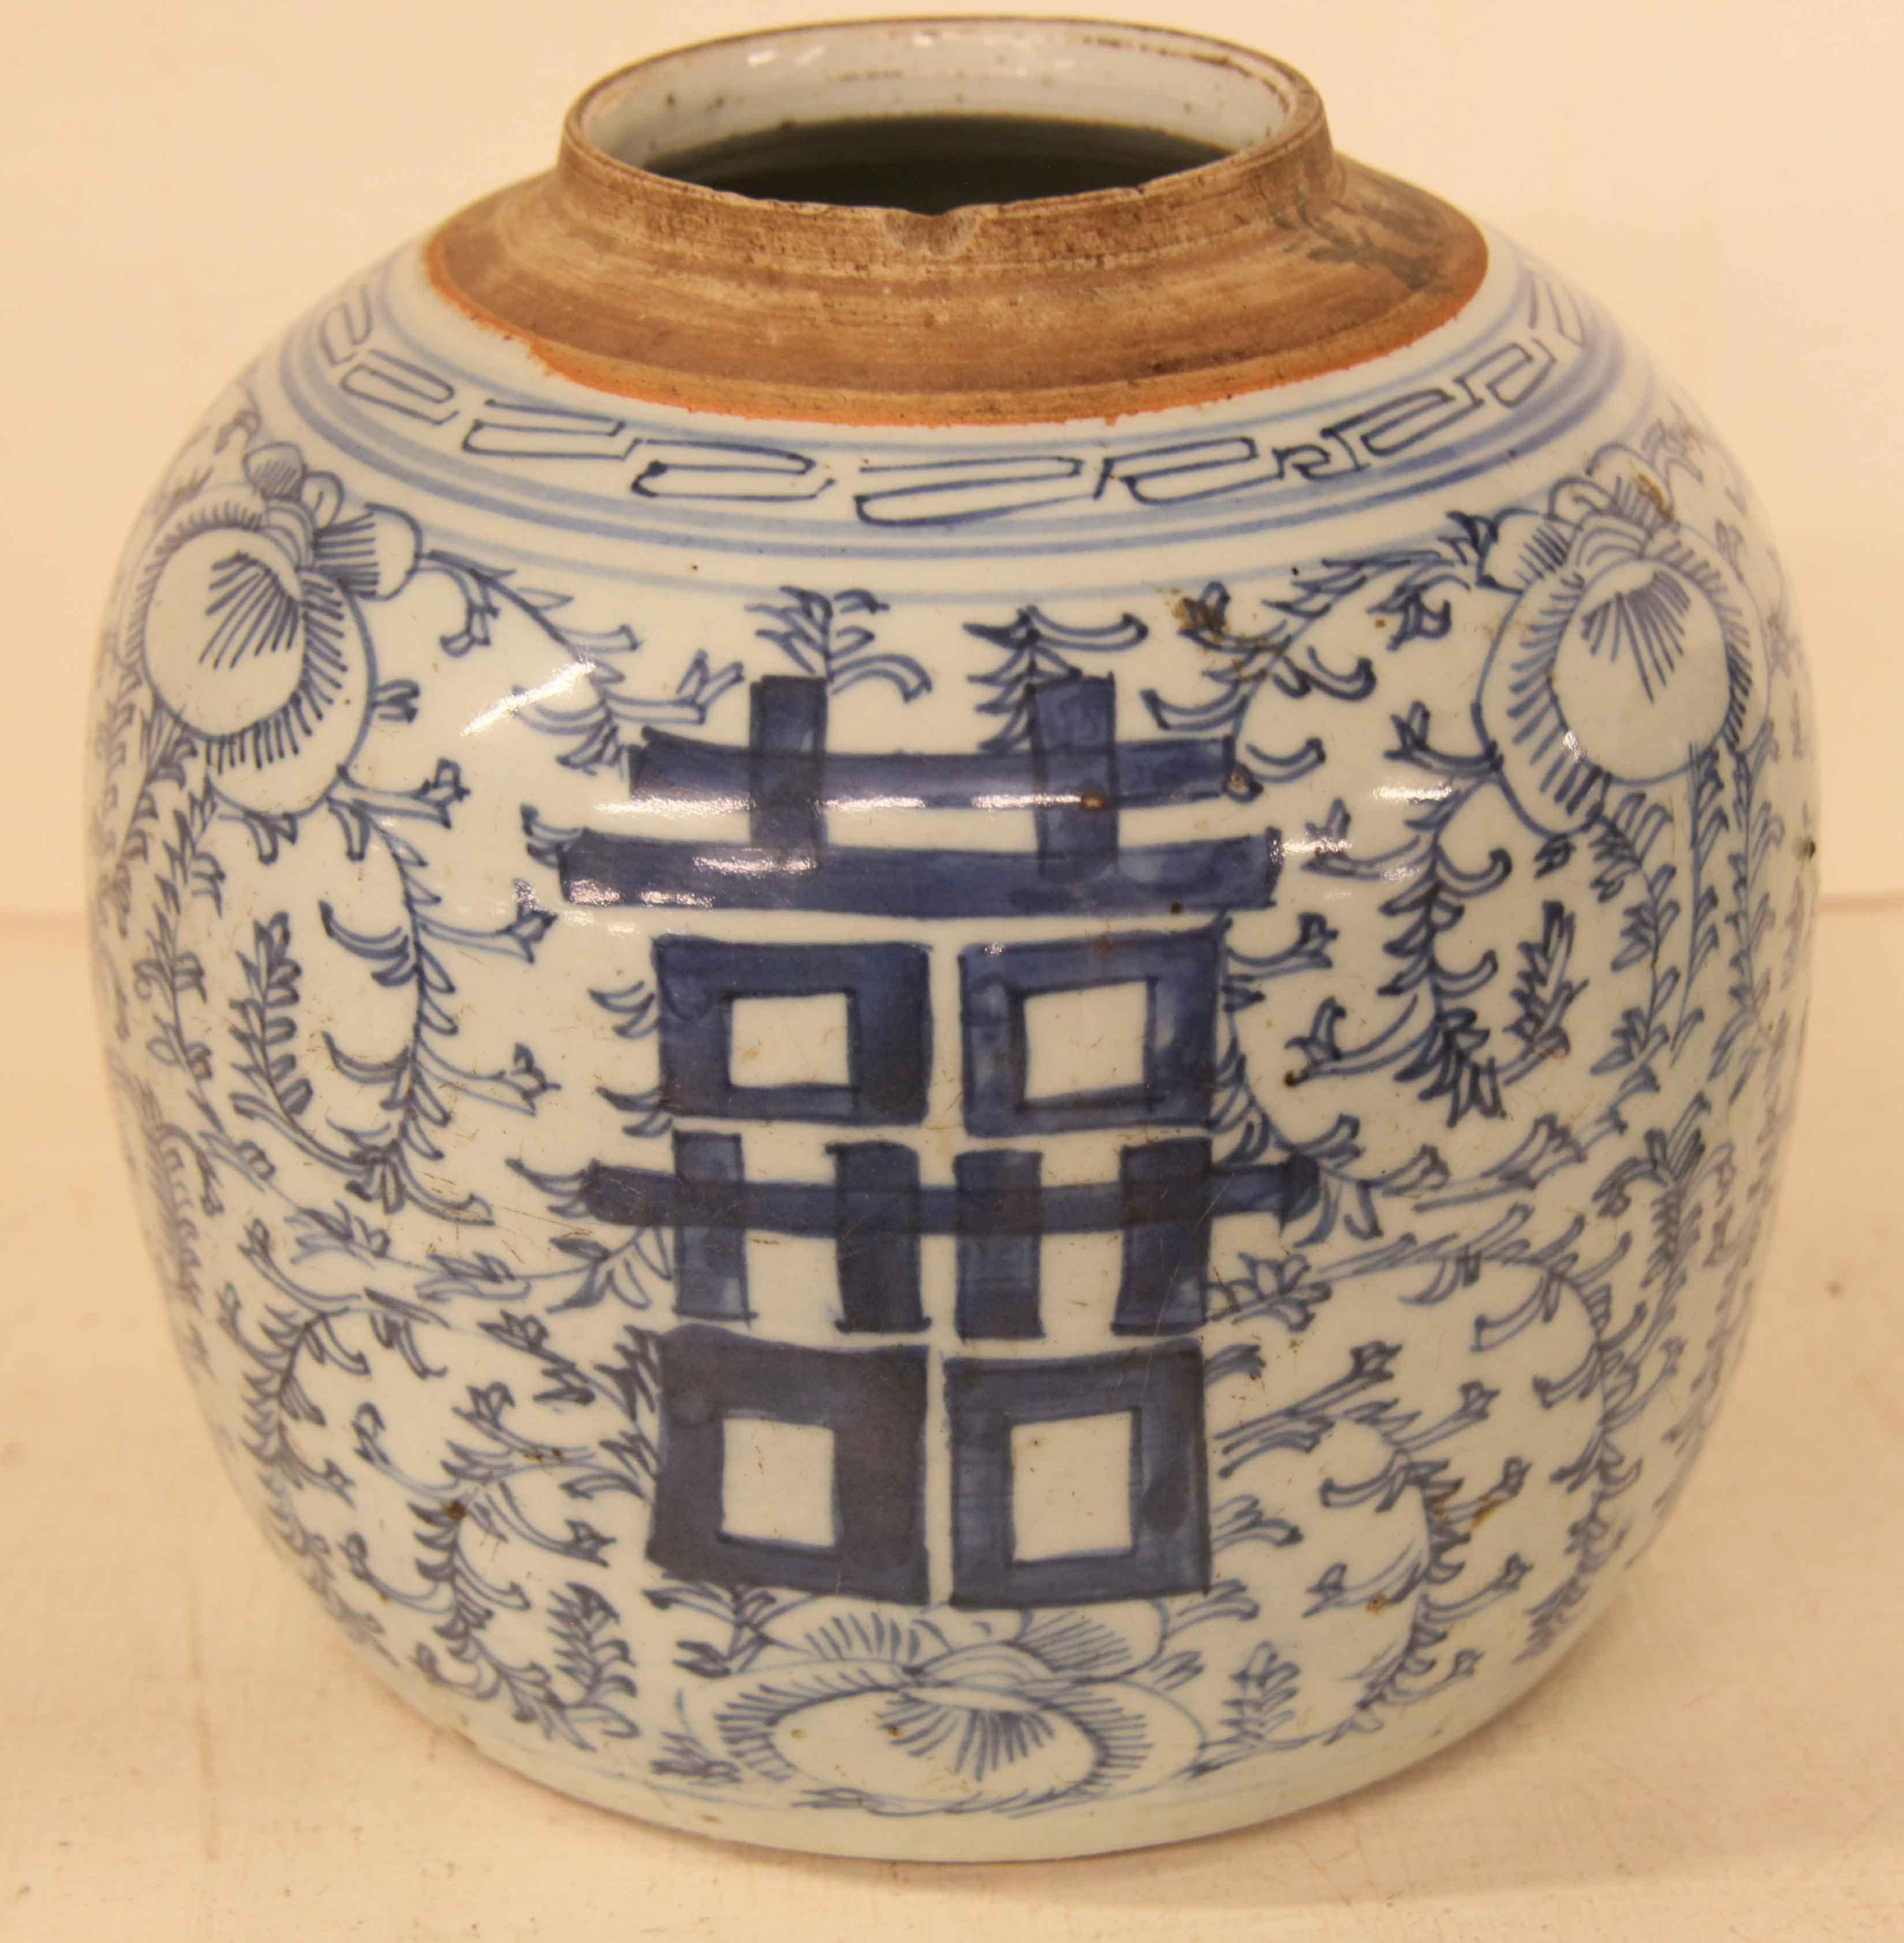 Two antique Chinese blue and white double happiness ginger jars,  these near pair of jars have the double happiness symbol representing man and woman together in marriage.   The three symbols on each jar are surrounded with scrolling vines and